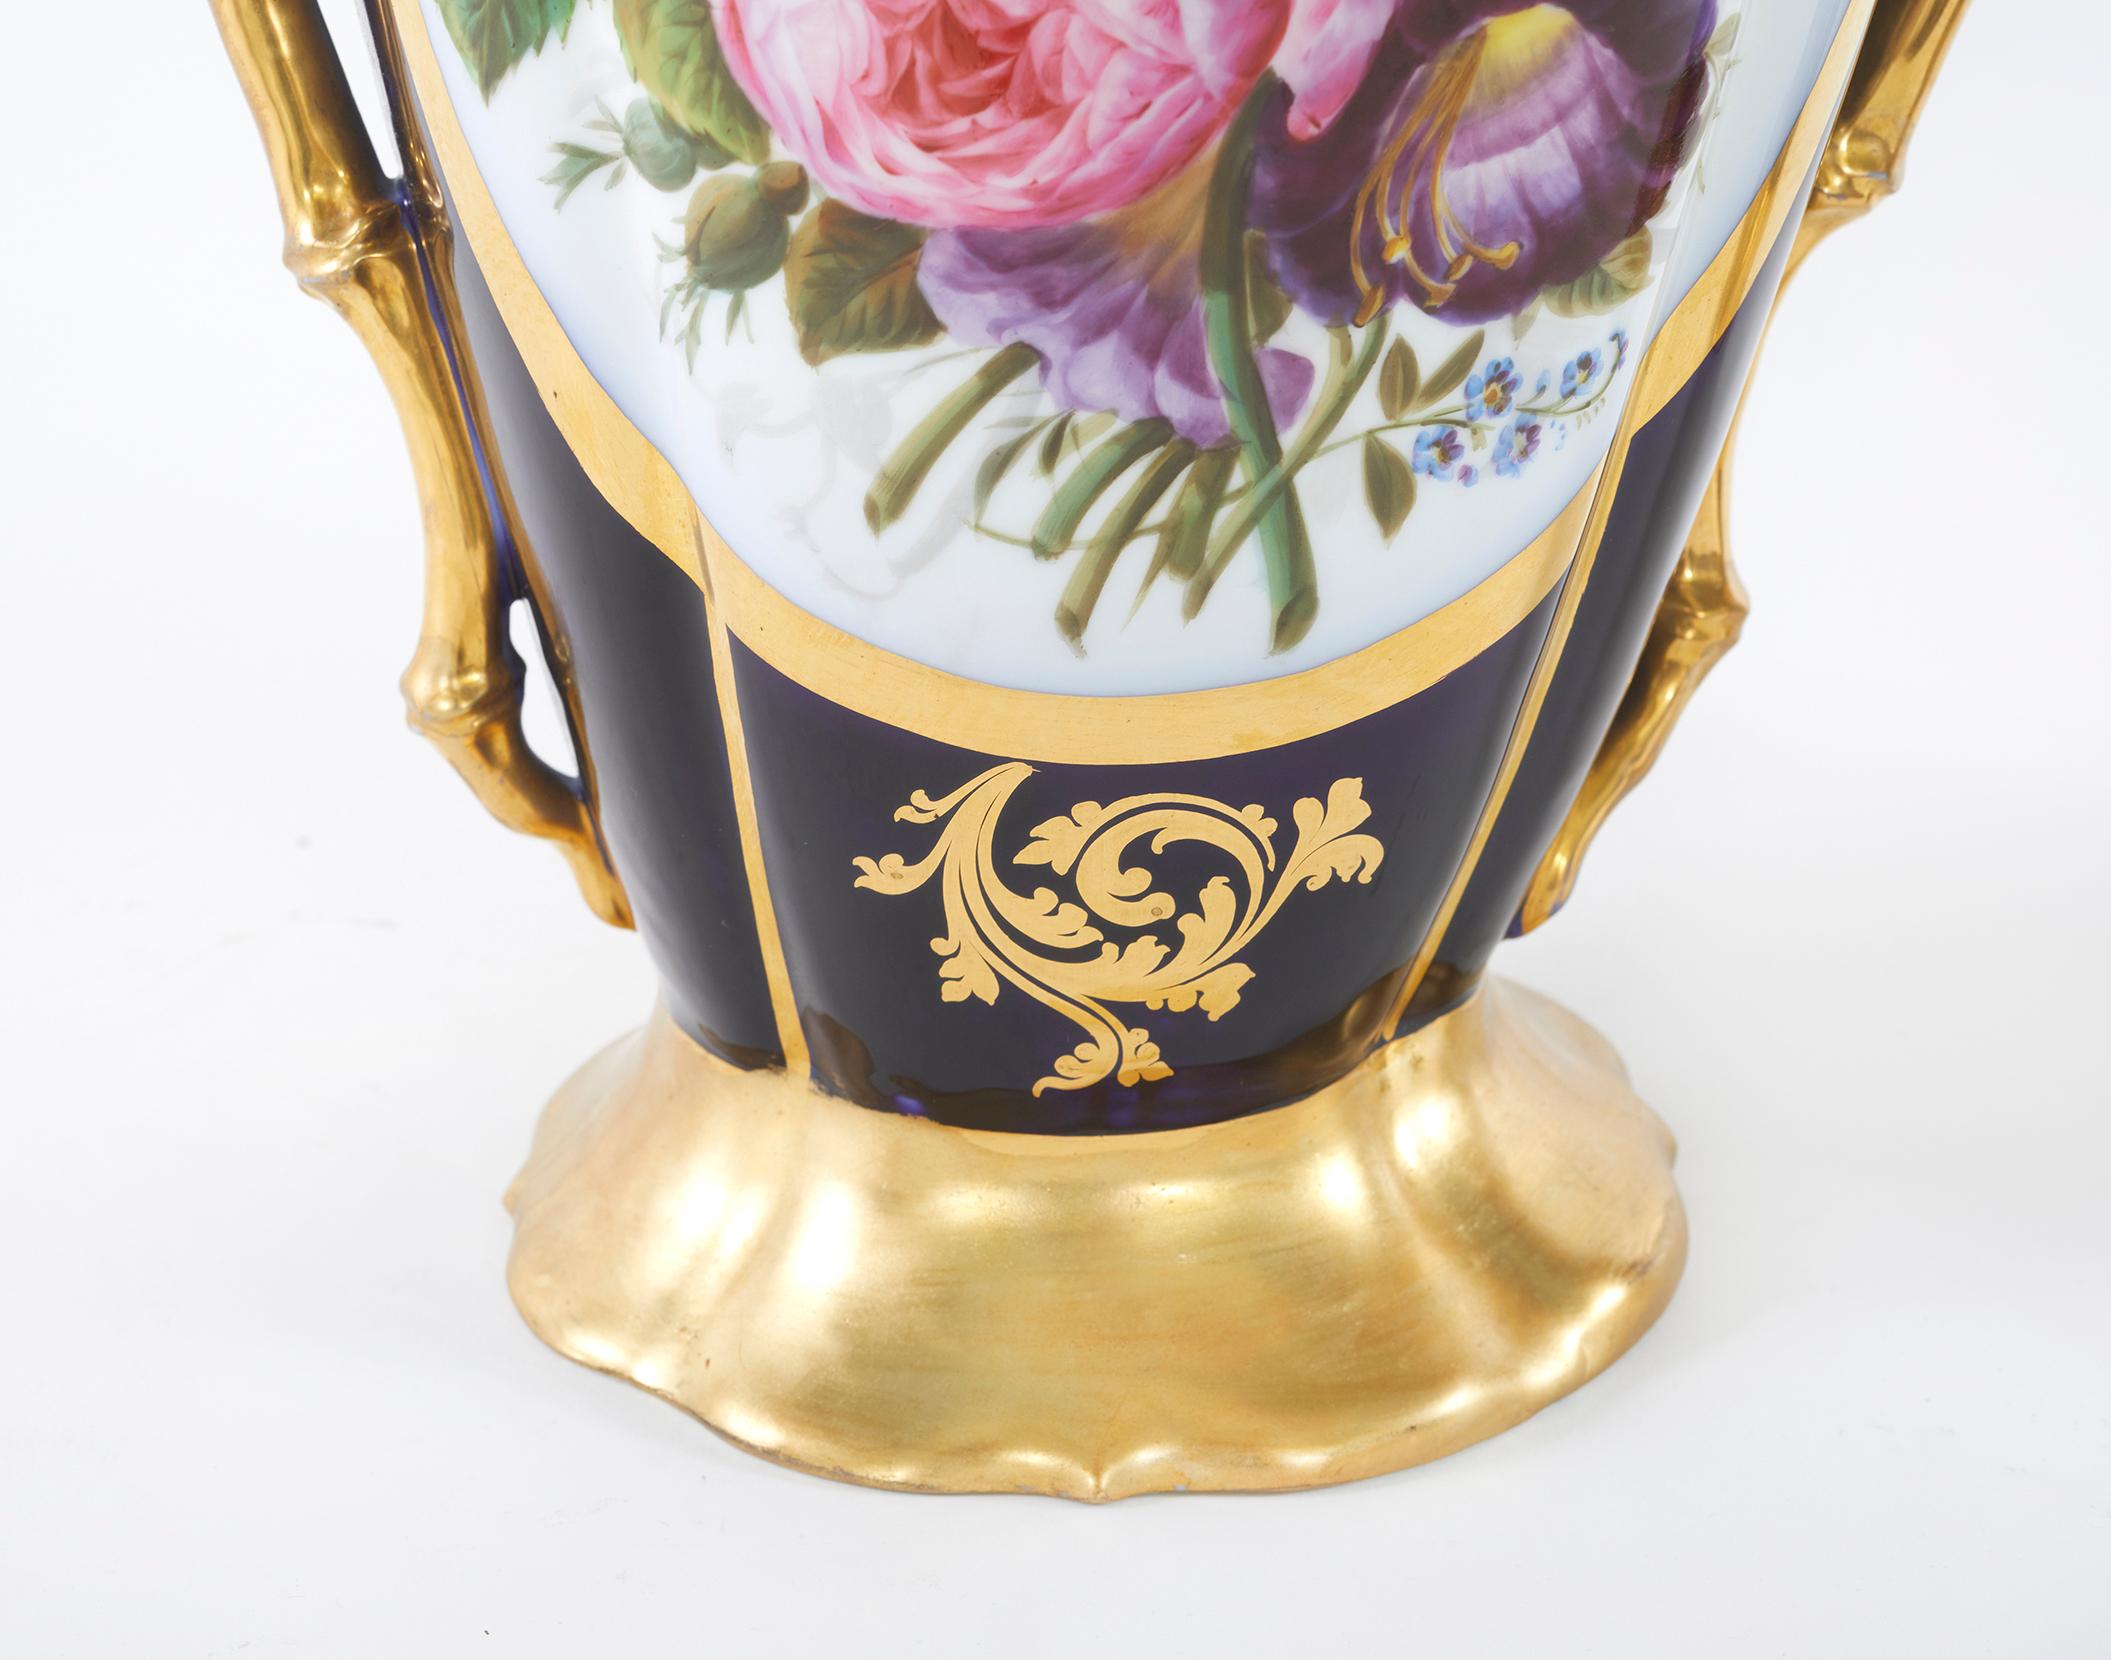 Mid 19th century pair of Old Paris Porcelain decorative vases / urns with exterior gilt gold painted design detail scenes. Each vase featuring two gilt handles and painted scenes of figures in a garden court setting. Each vase is in great condition.